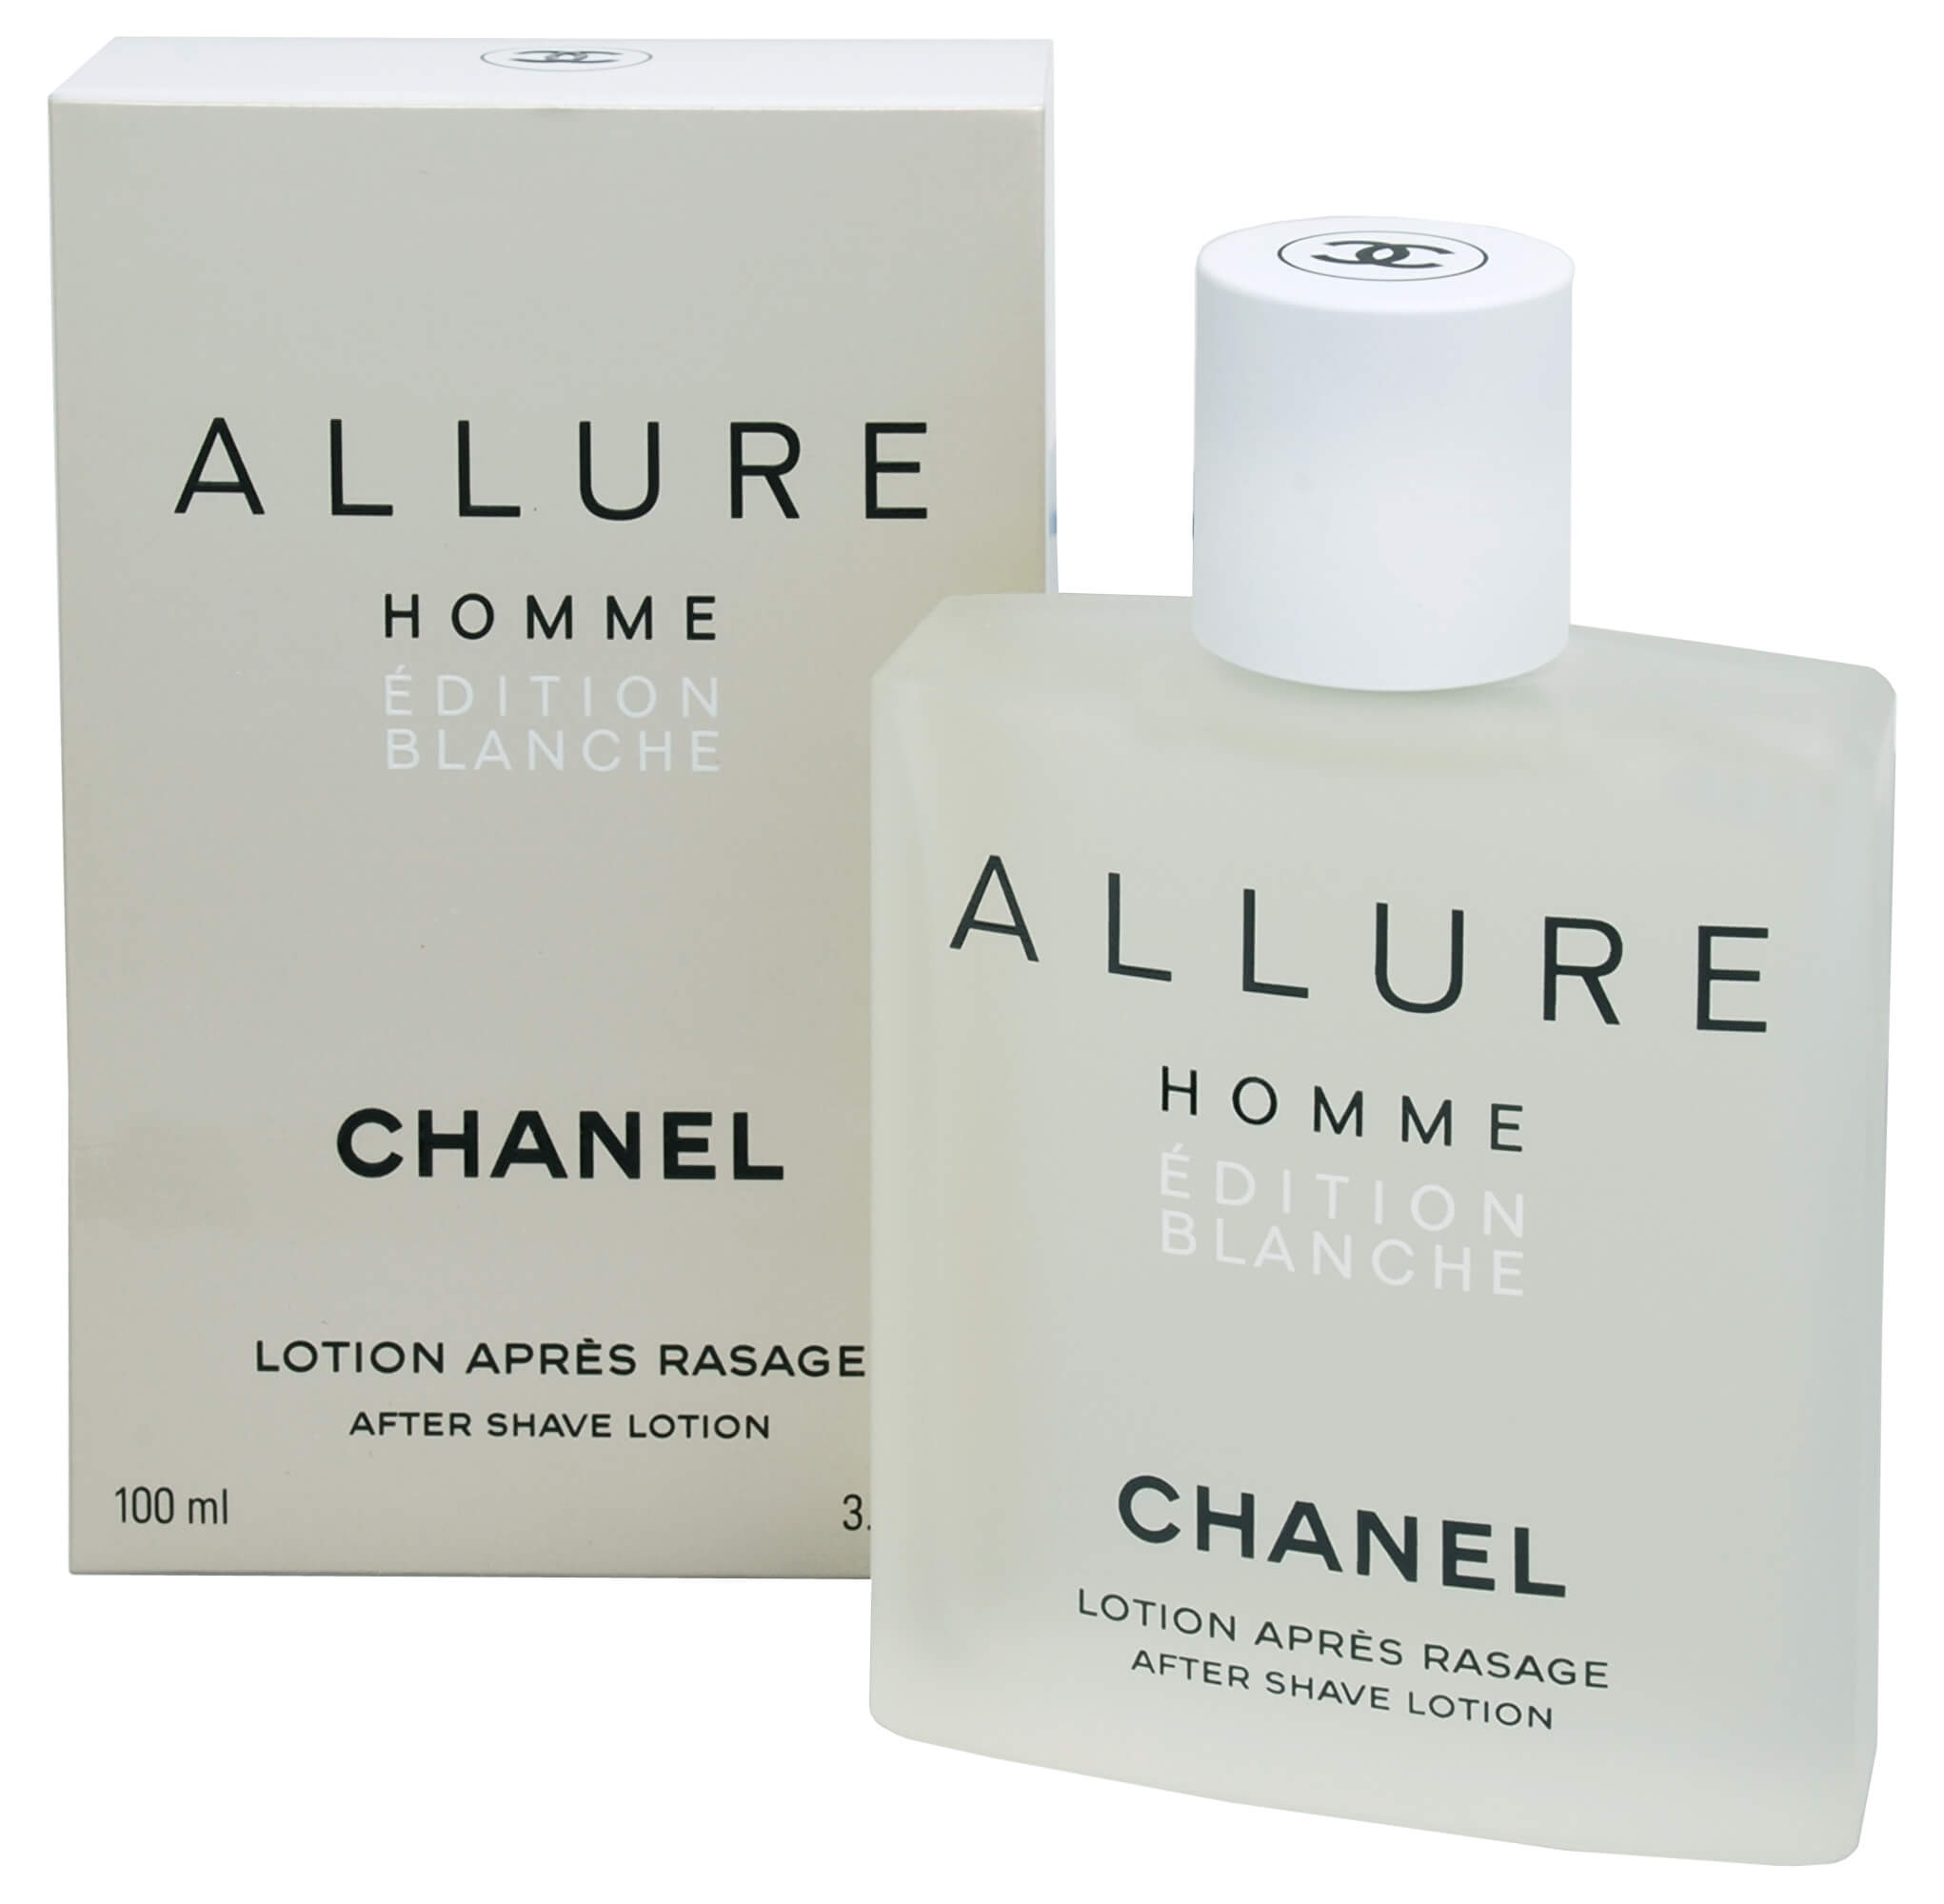 Chanel homme blanche. Chanel Allure homme Edition Blanche 100ml. Allure homme Edition Blanche Chanel 100 мл духи мужские. Chanel мужские. Allure homme Edition Blanche. Chanel мужские. Allure homme Edition Blanche 150ml.